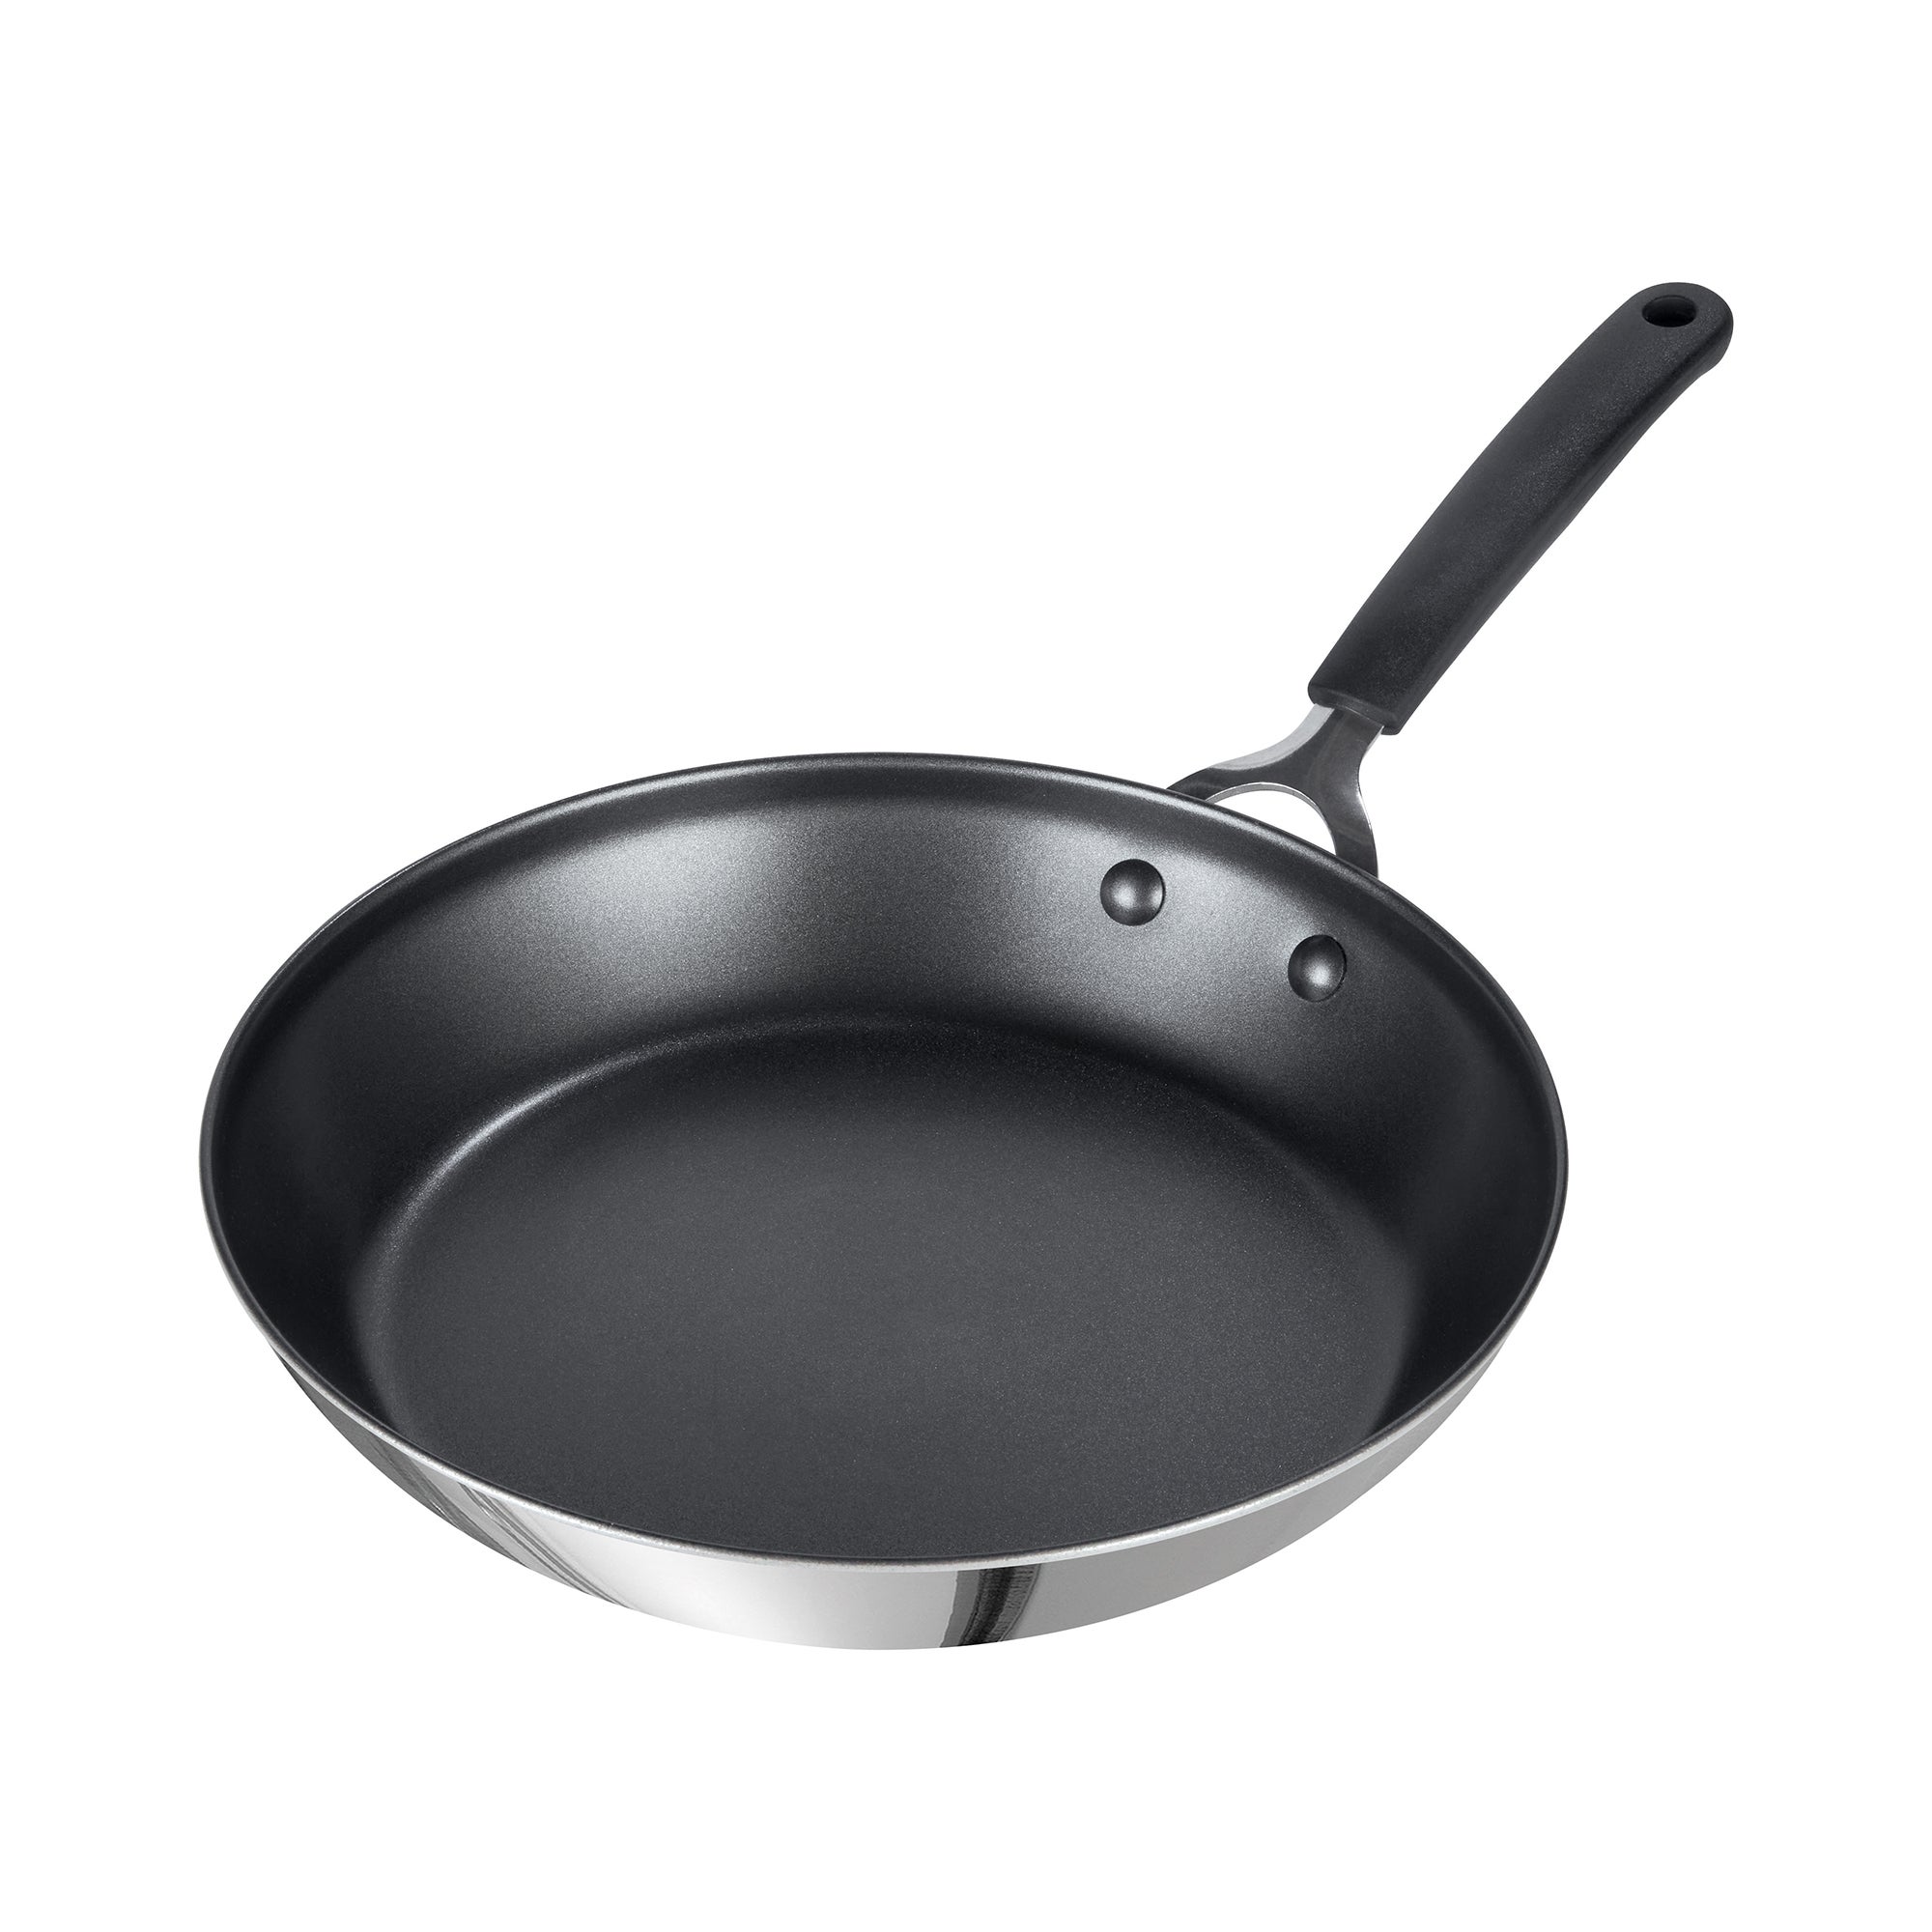 Prestige Made to Last Non-Stick Frying Pan, 30cm